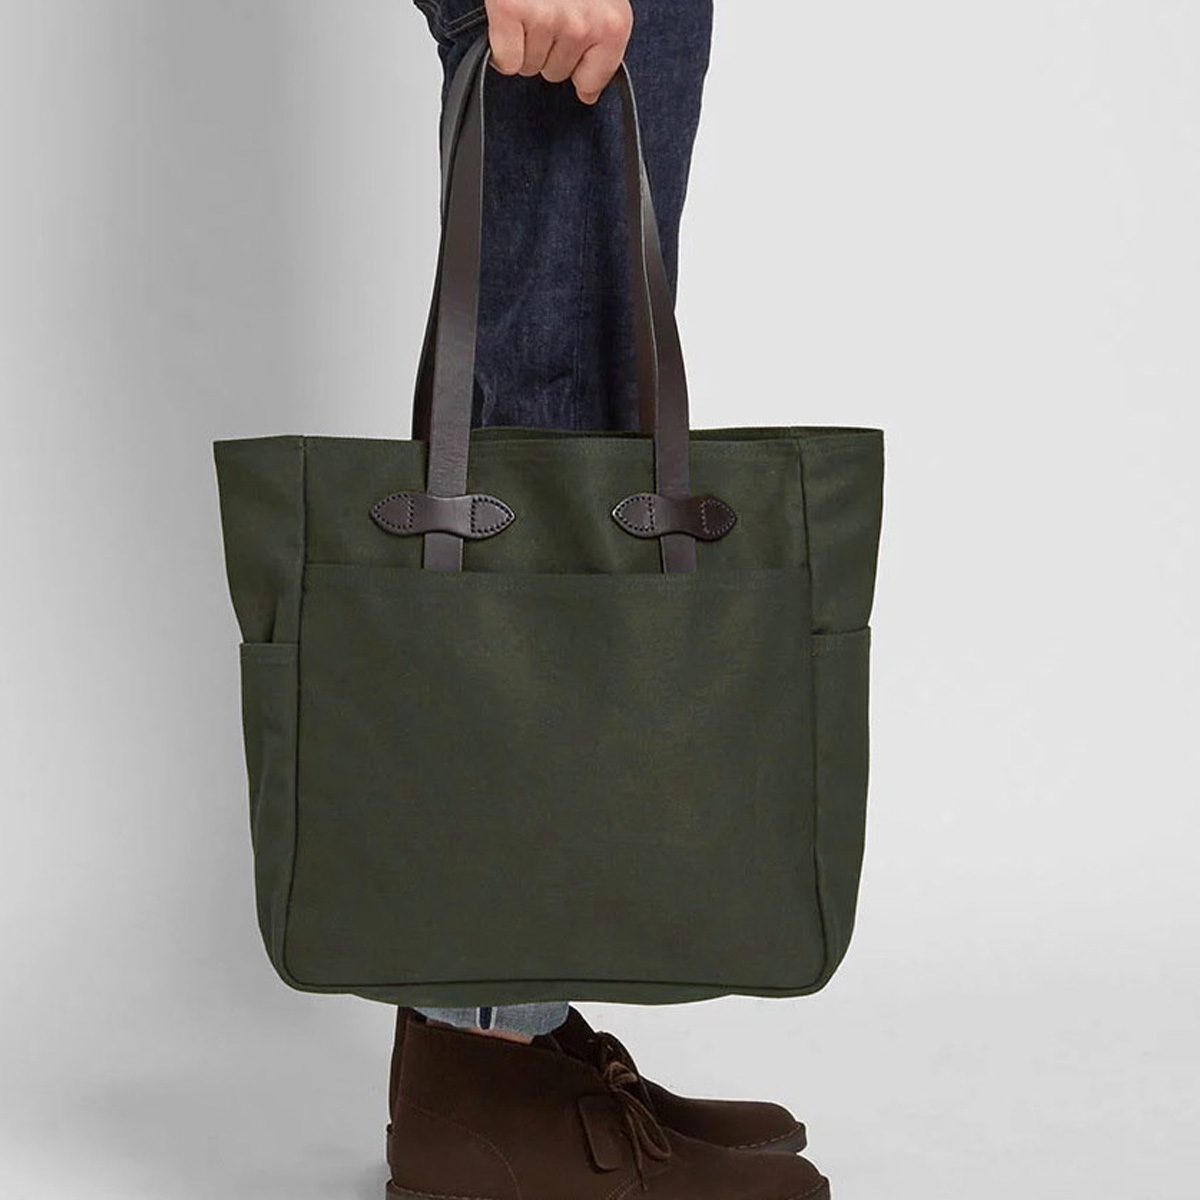 Filson Rugged Twill Tote Bag Otter Green